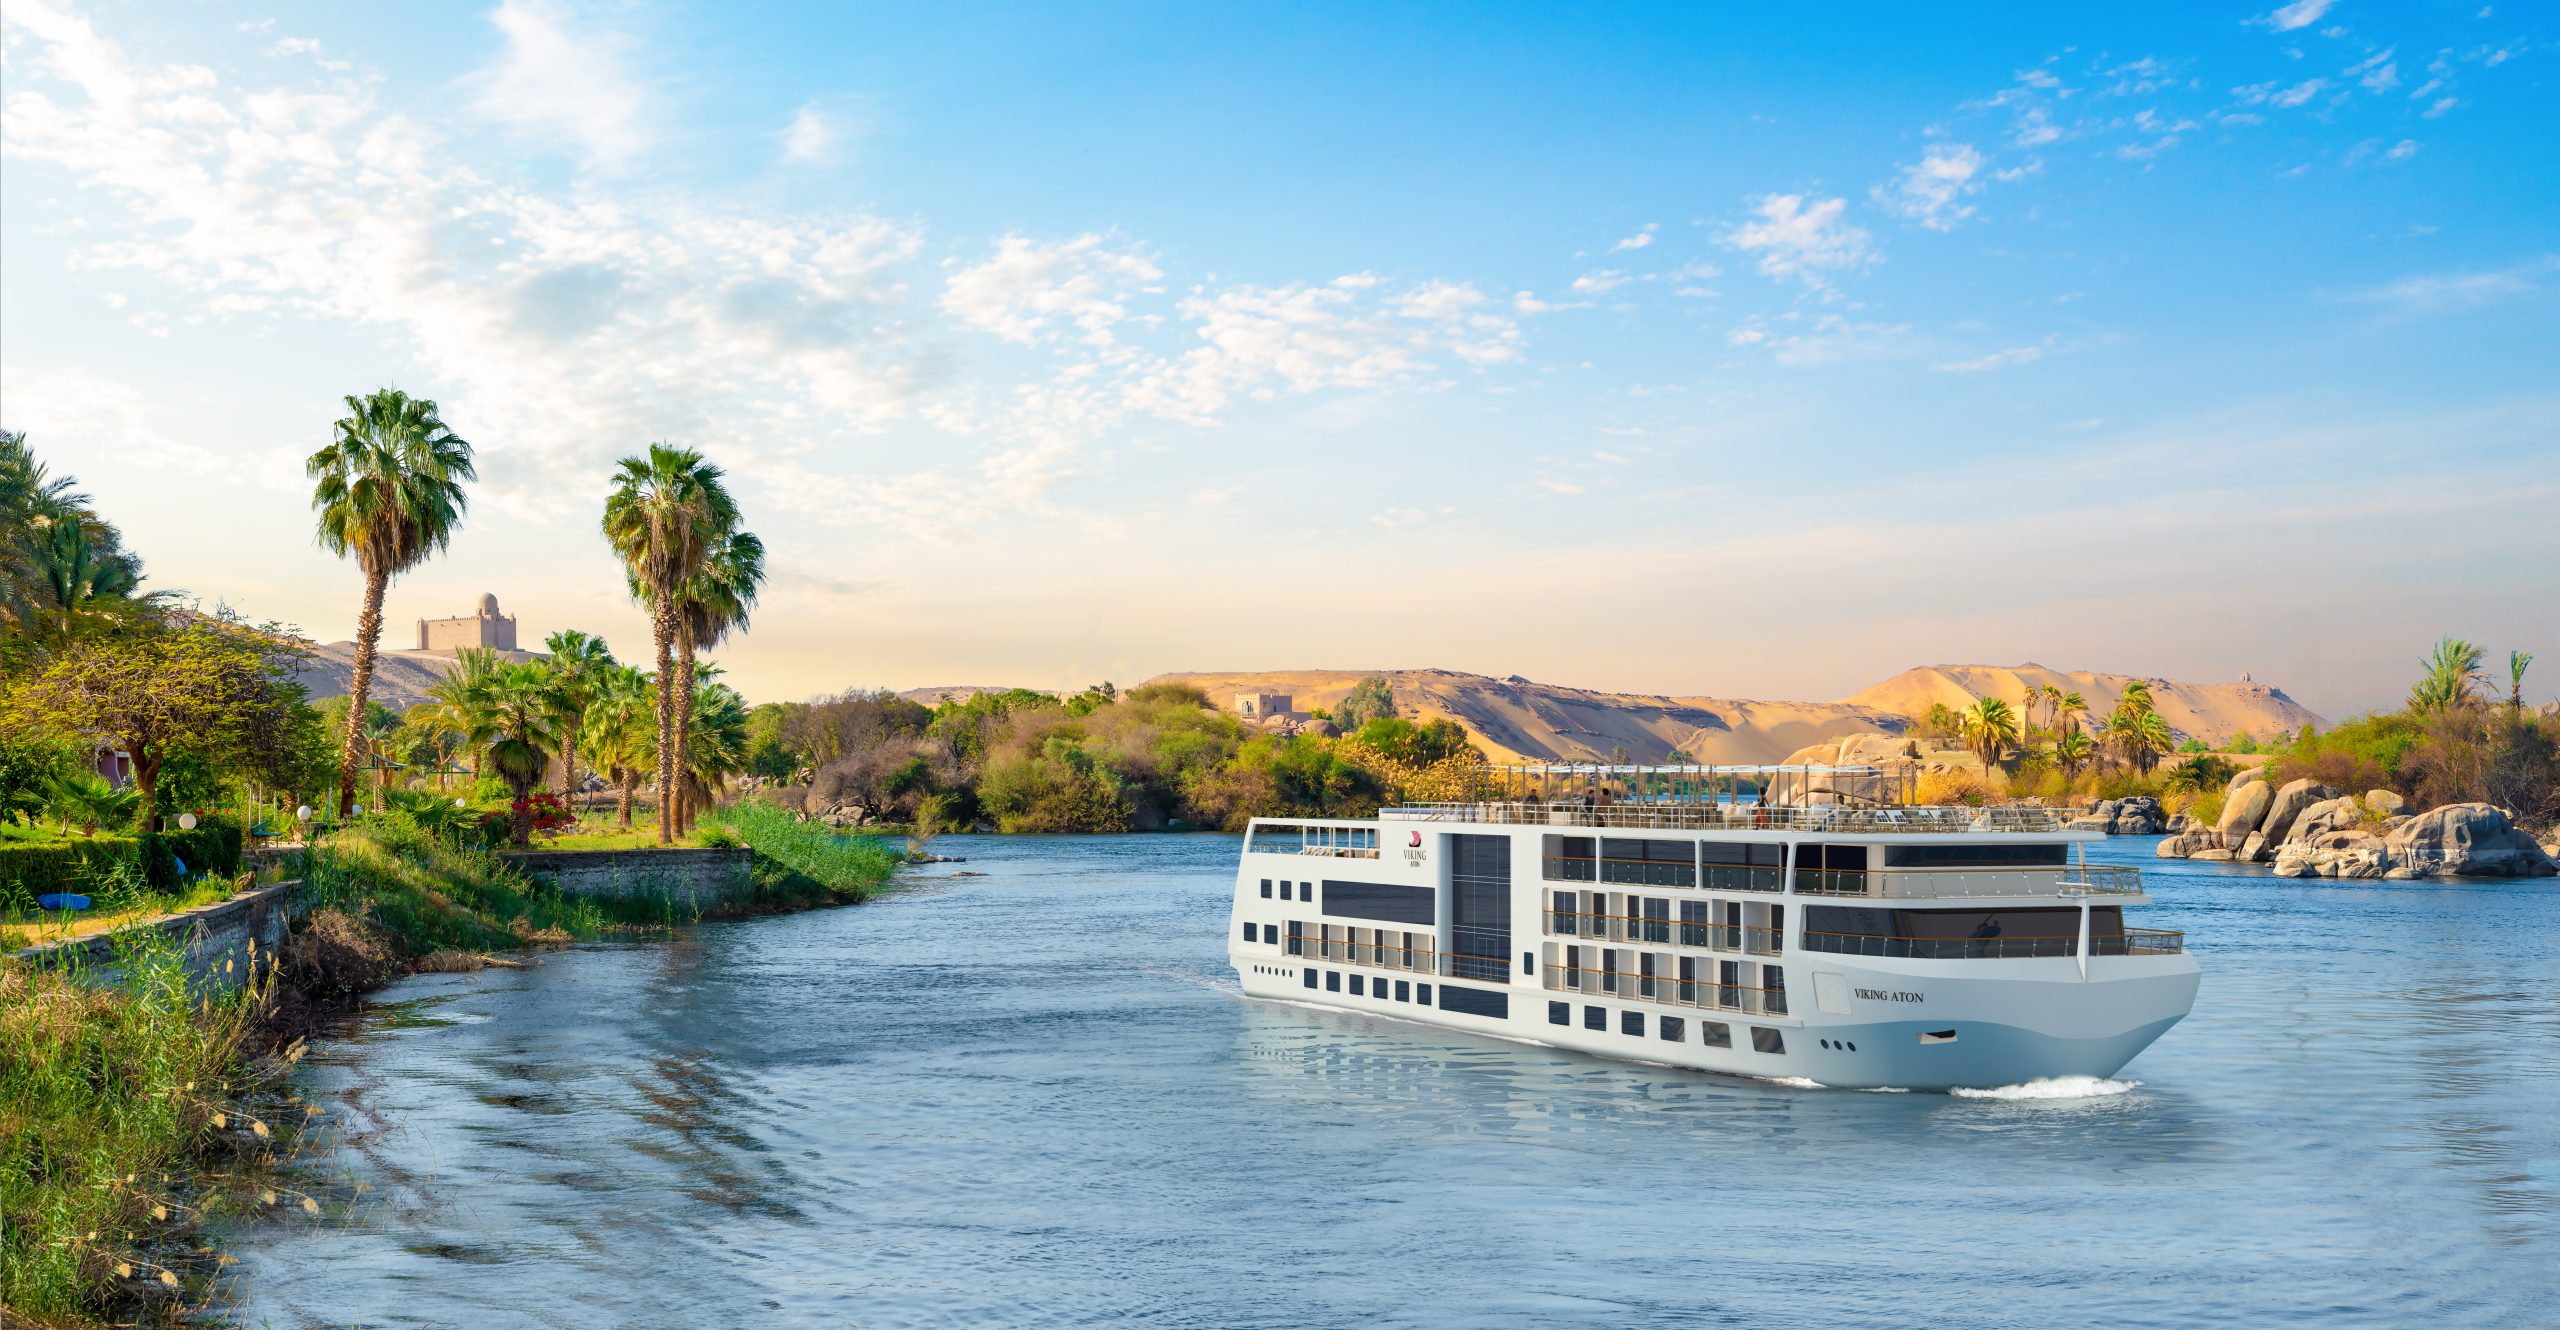 New ship, Viking Aton will debut on the Nile River in 2022 Cruise